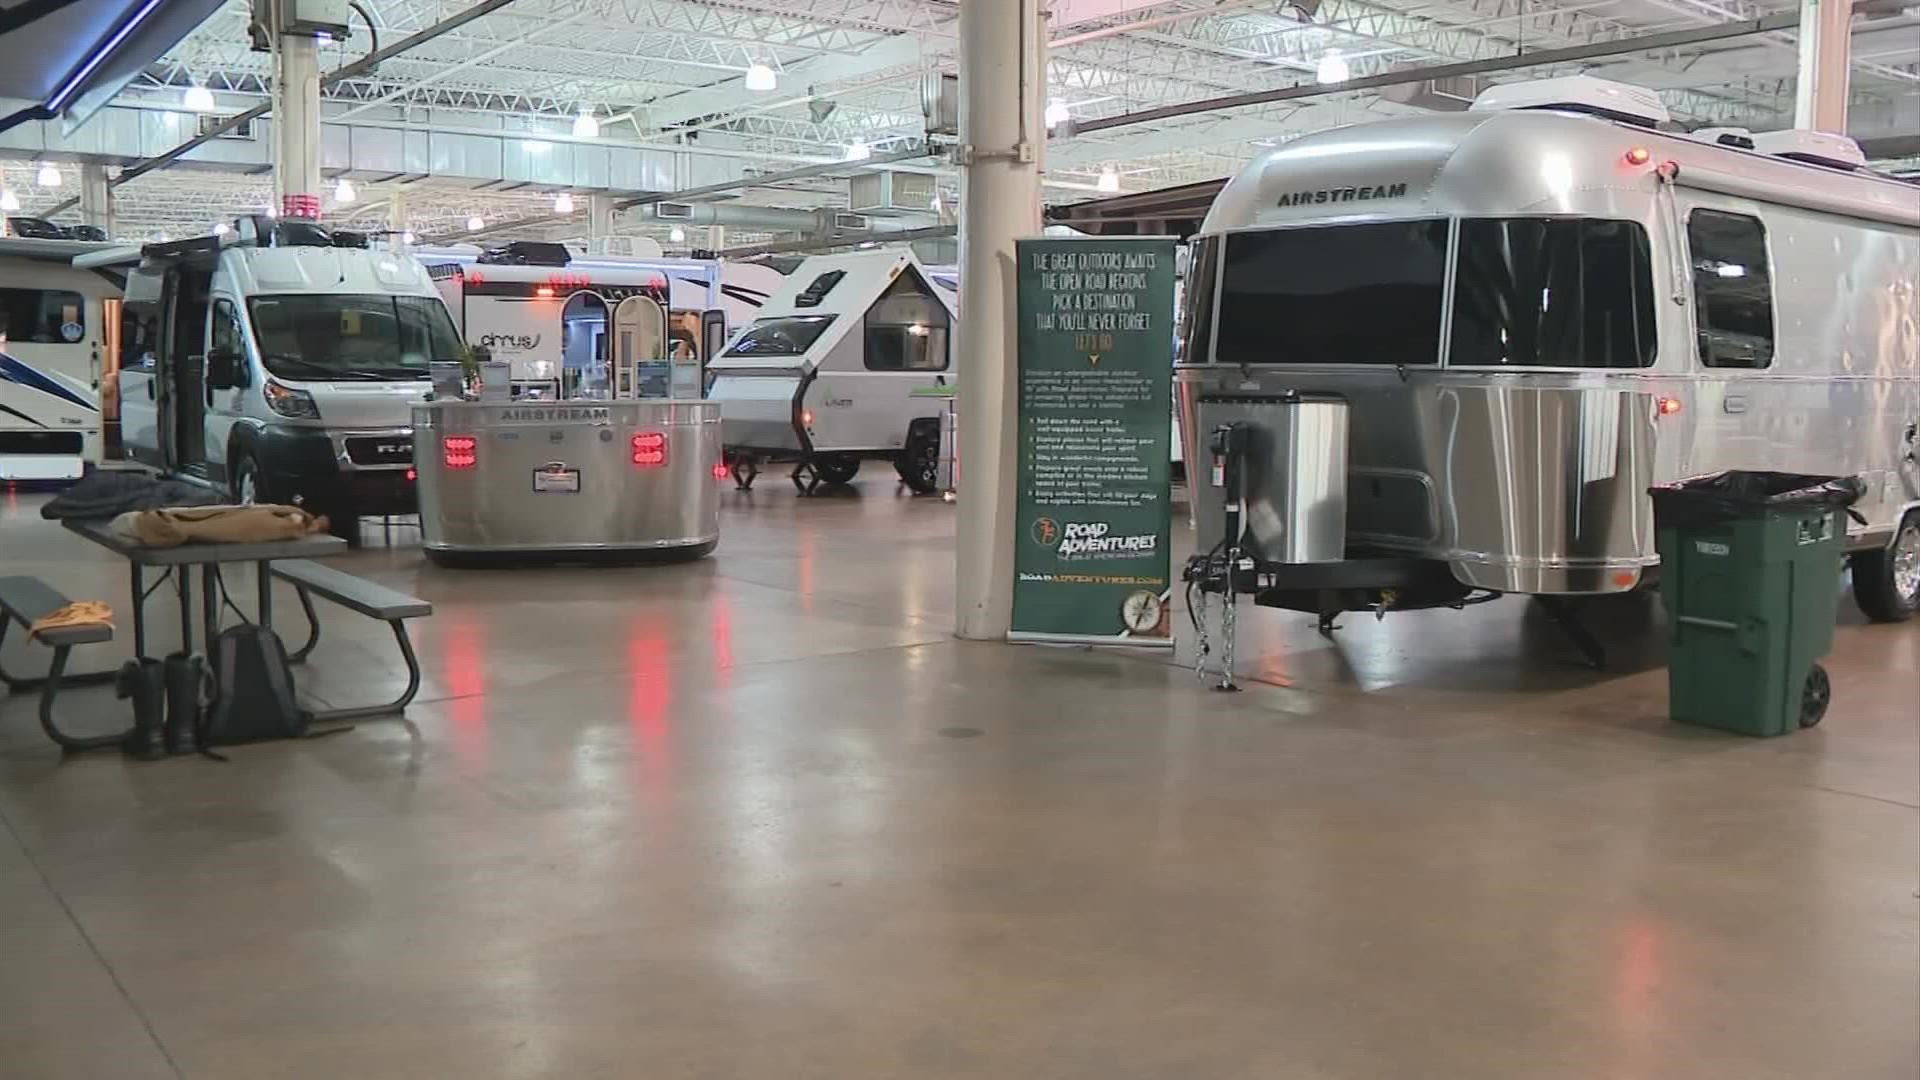 The Ohio RV and Boat show will display central Ohio’s inventory of recreational vehicles.